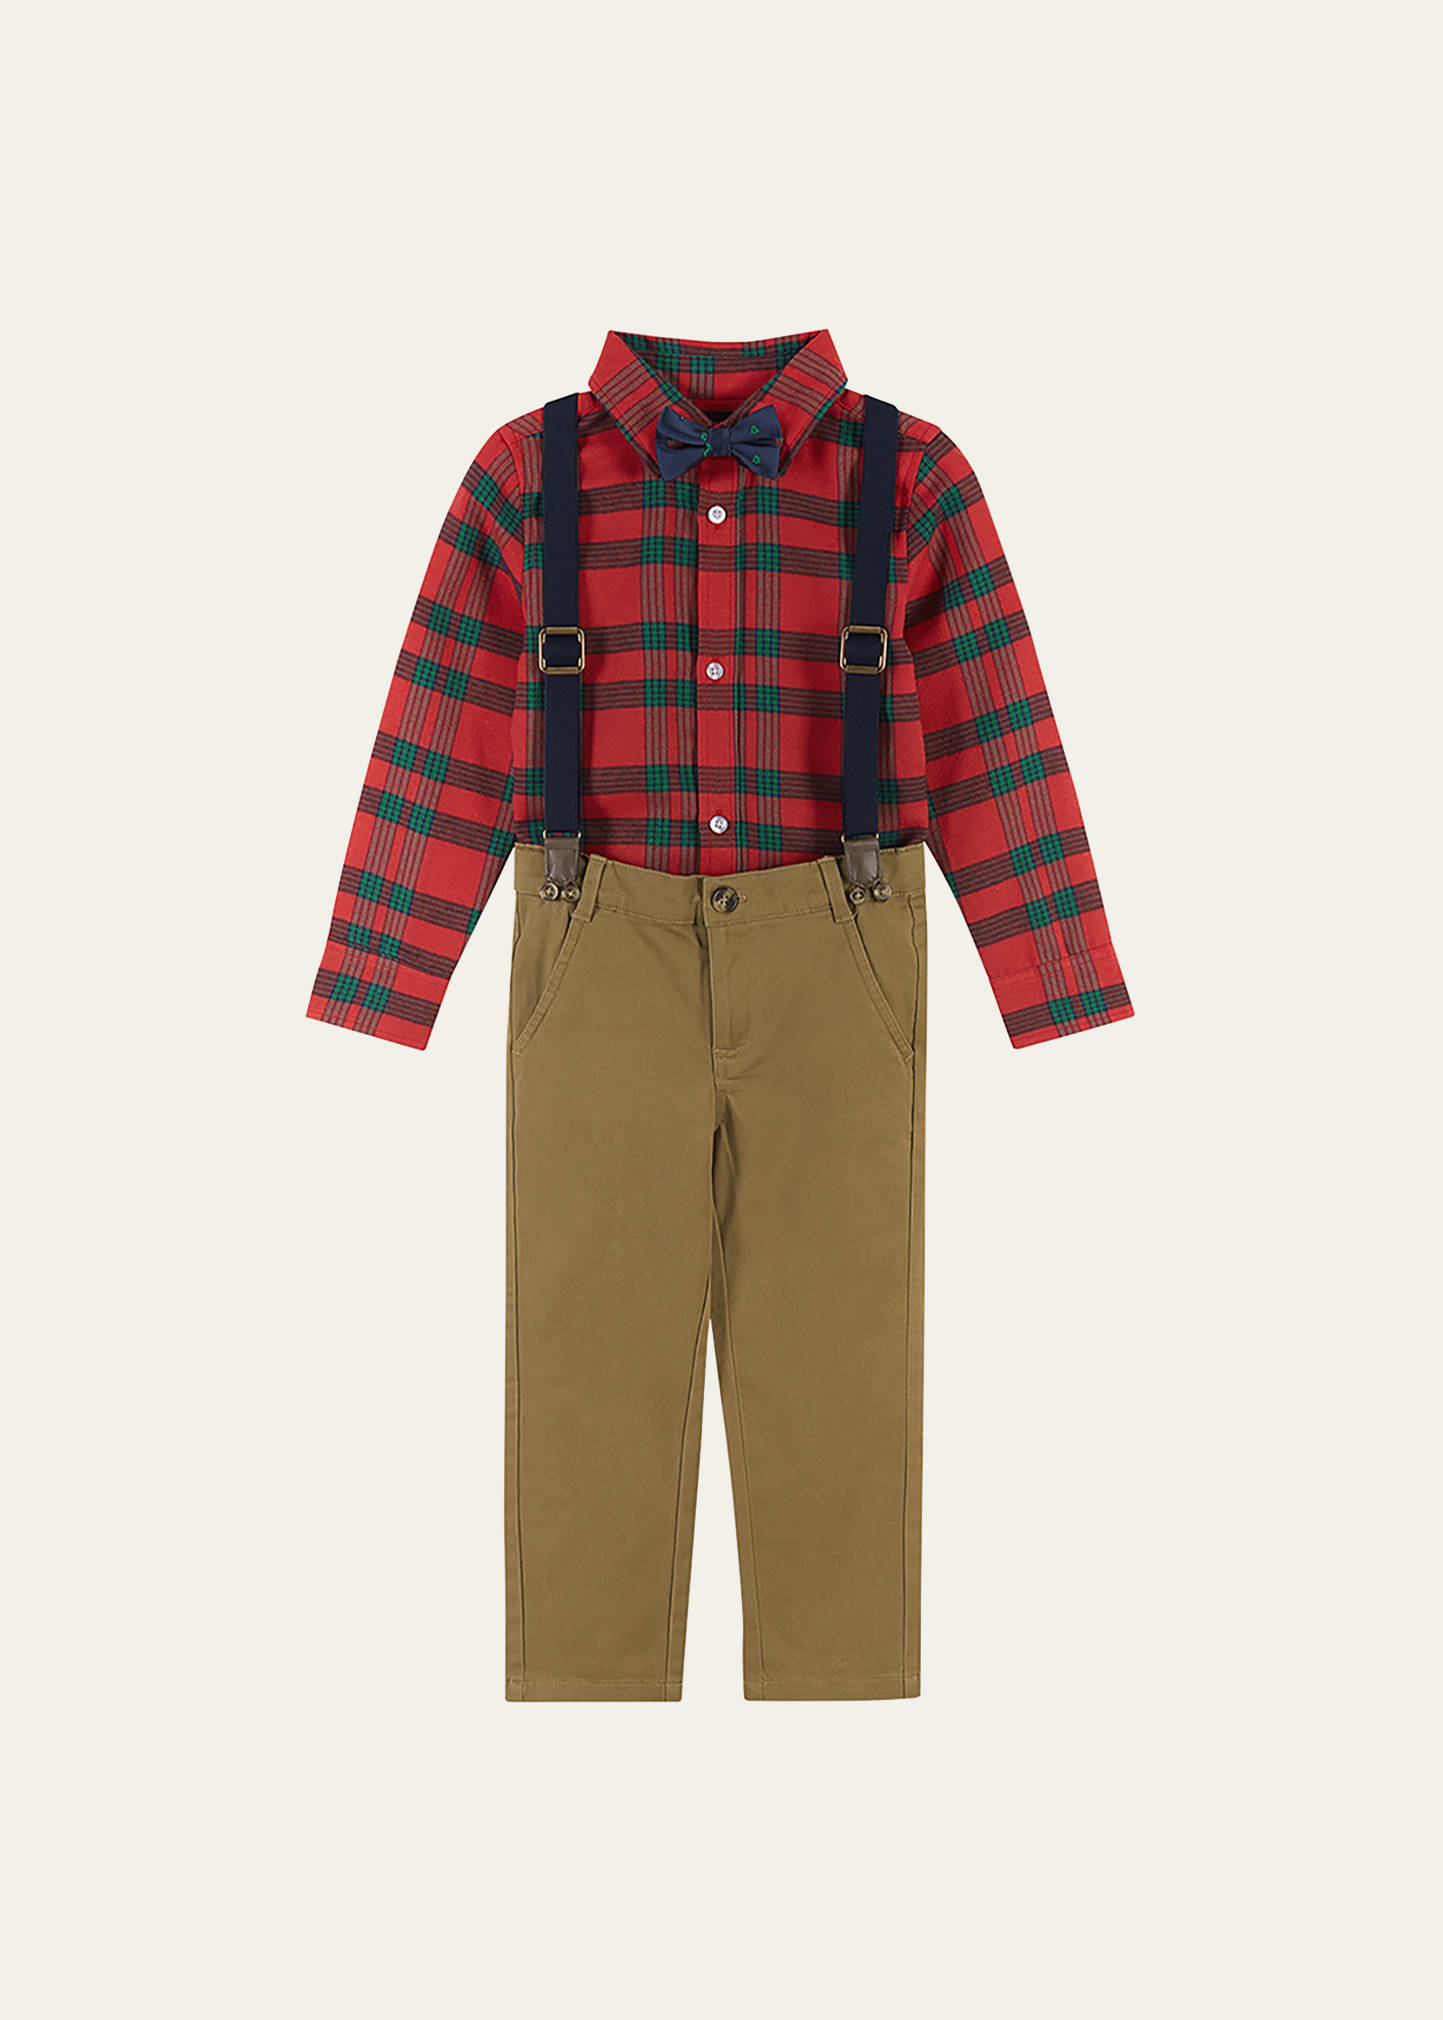 Shop Andy & Evan Boy's Flannel Button Down W/ Pants, Suspenders & Bowtie In Red Plaid